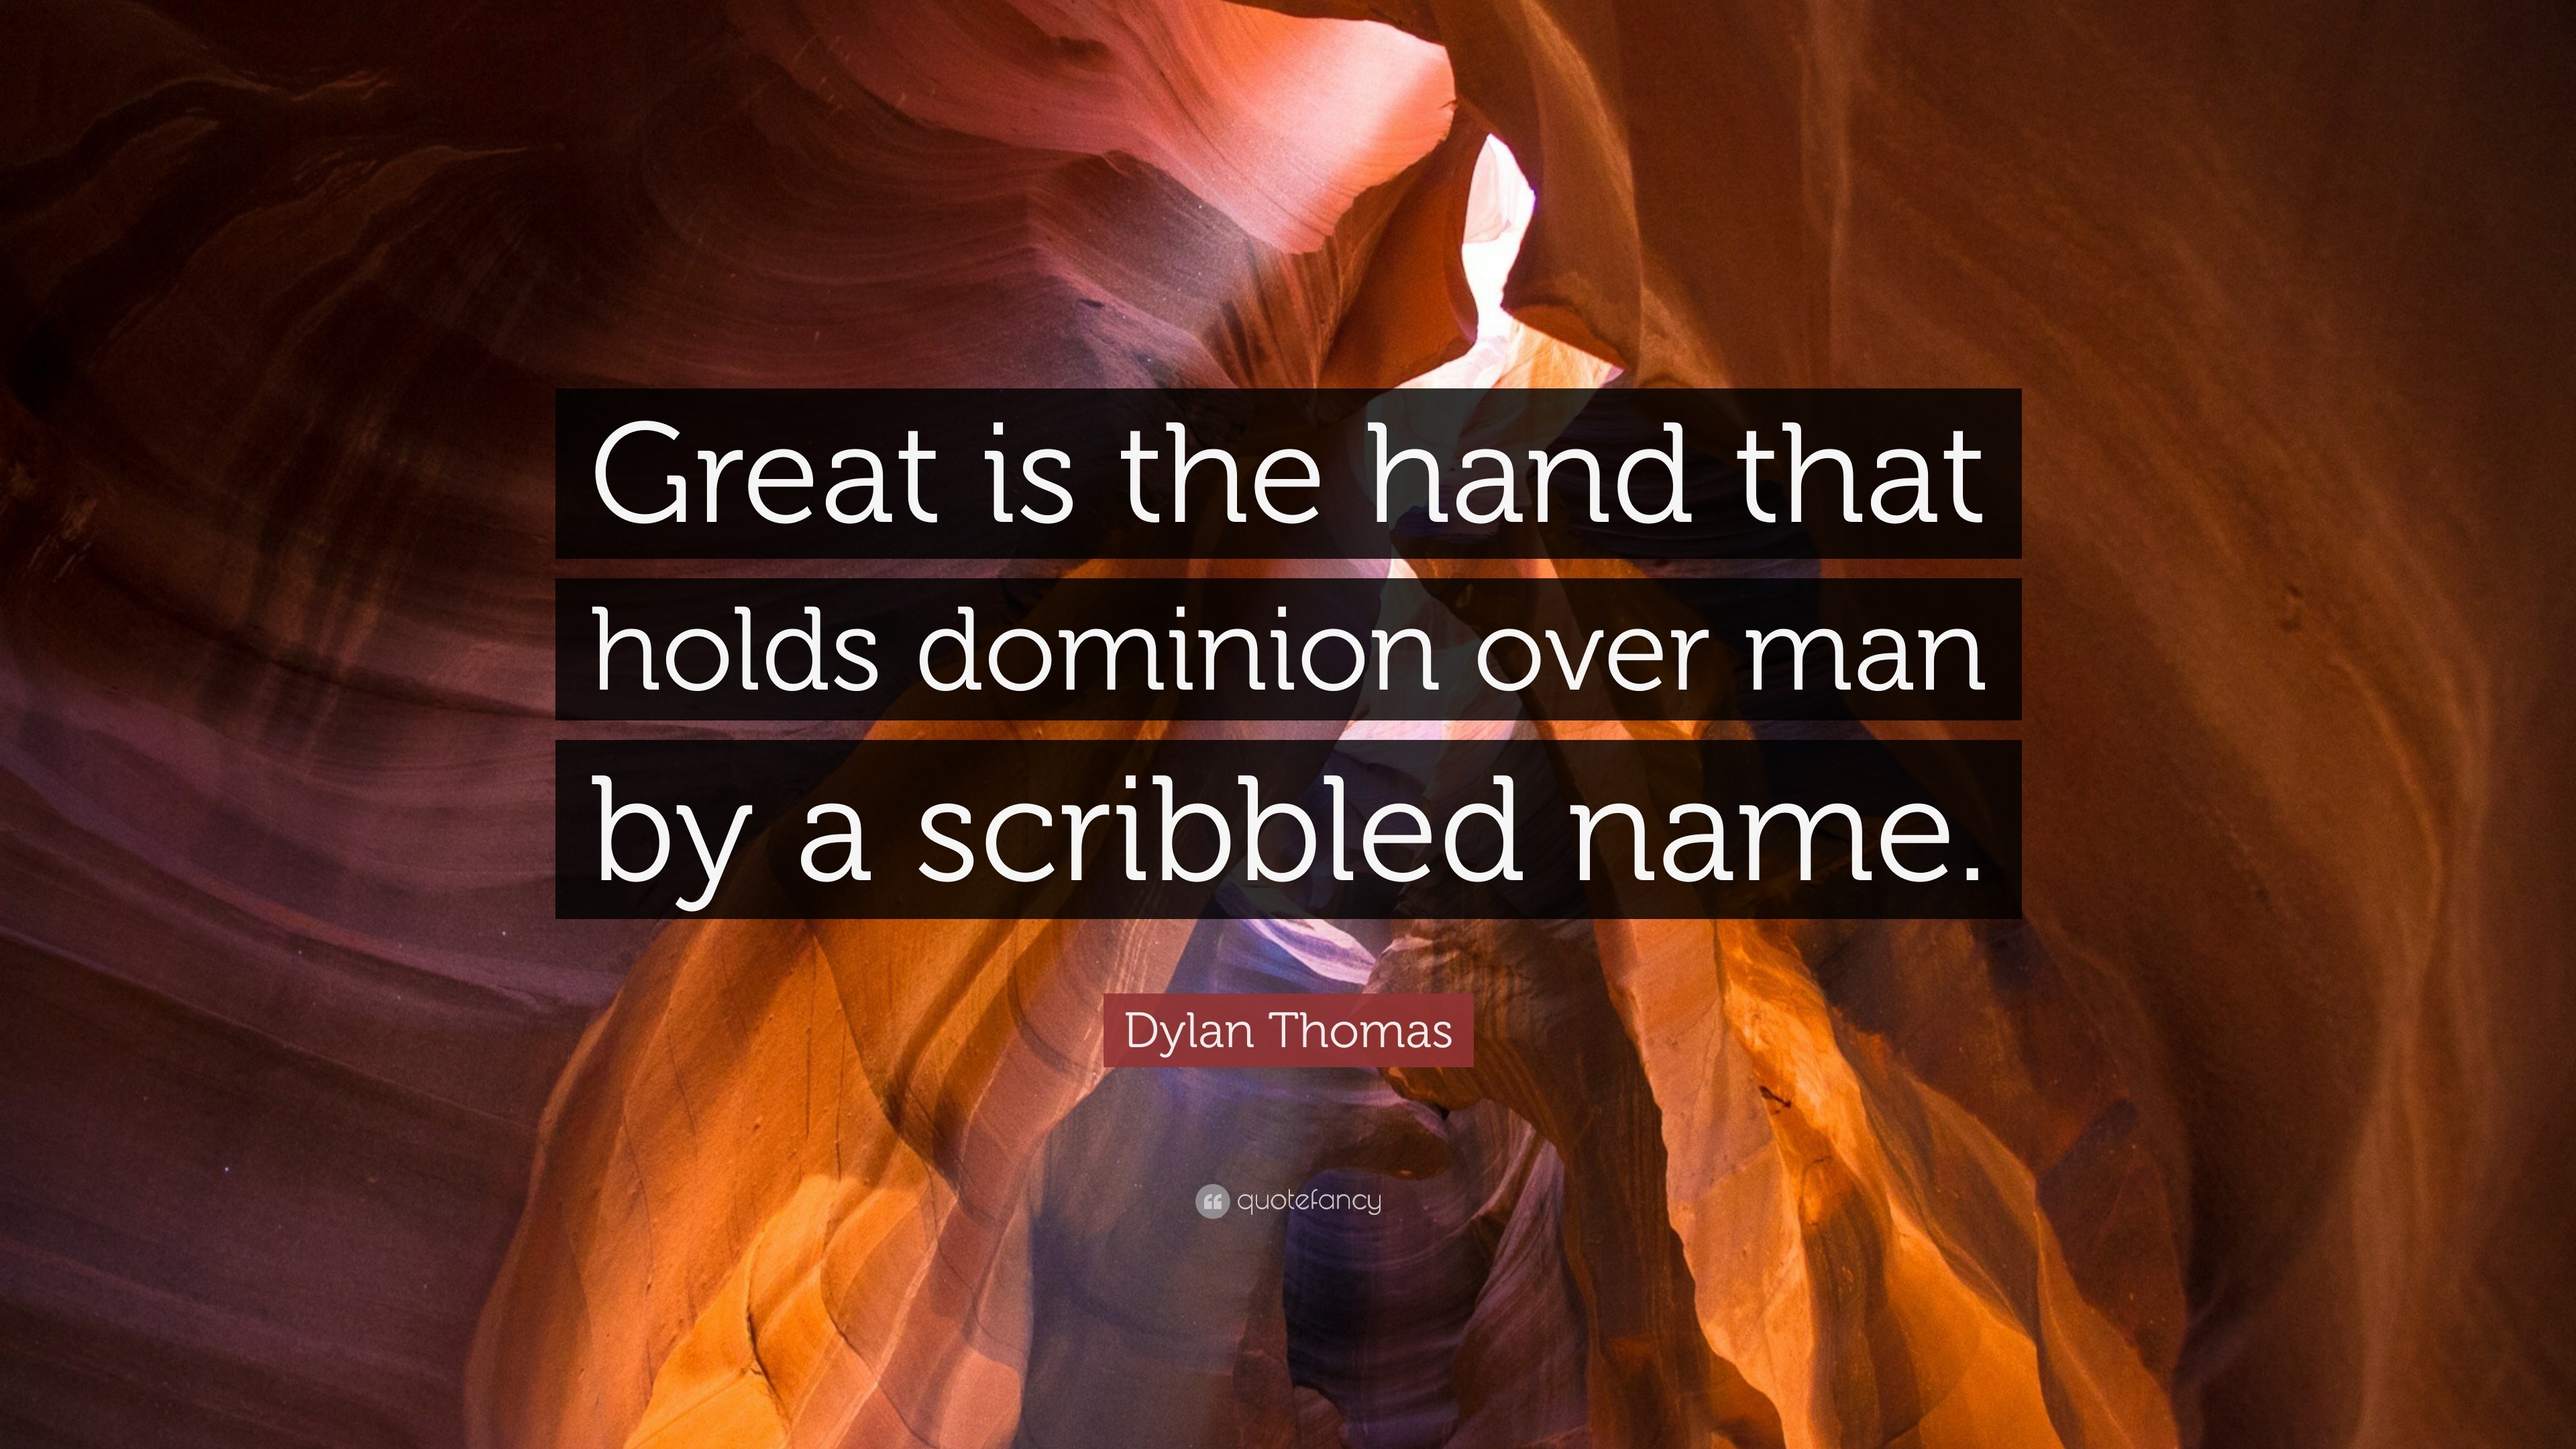 Dylan Thomas Quote: “Great is the hand that holds dominion over man by a  scribbled name.”